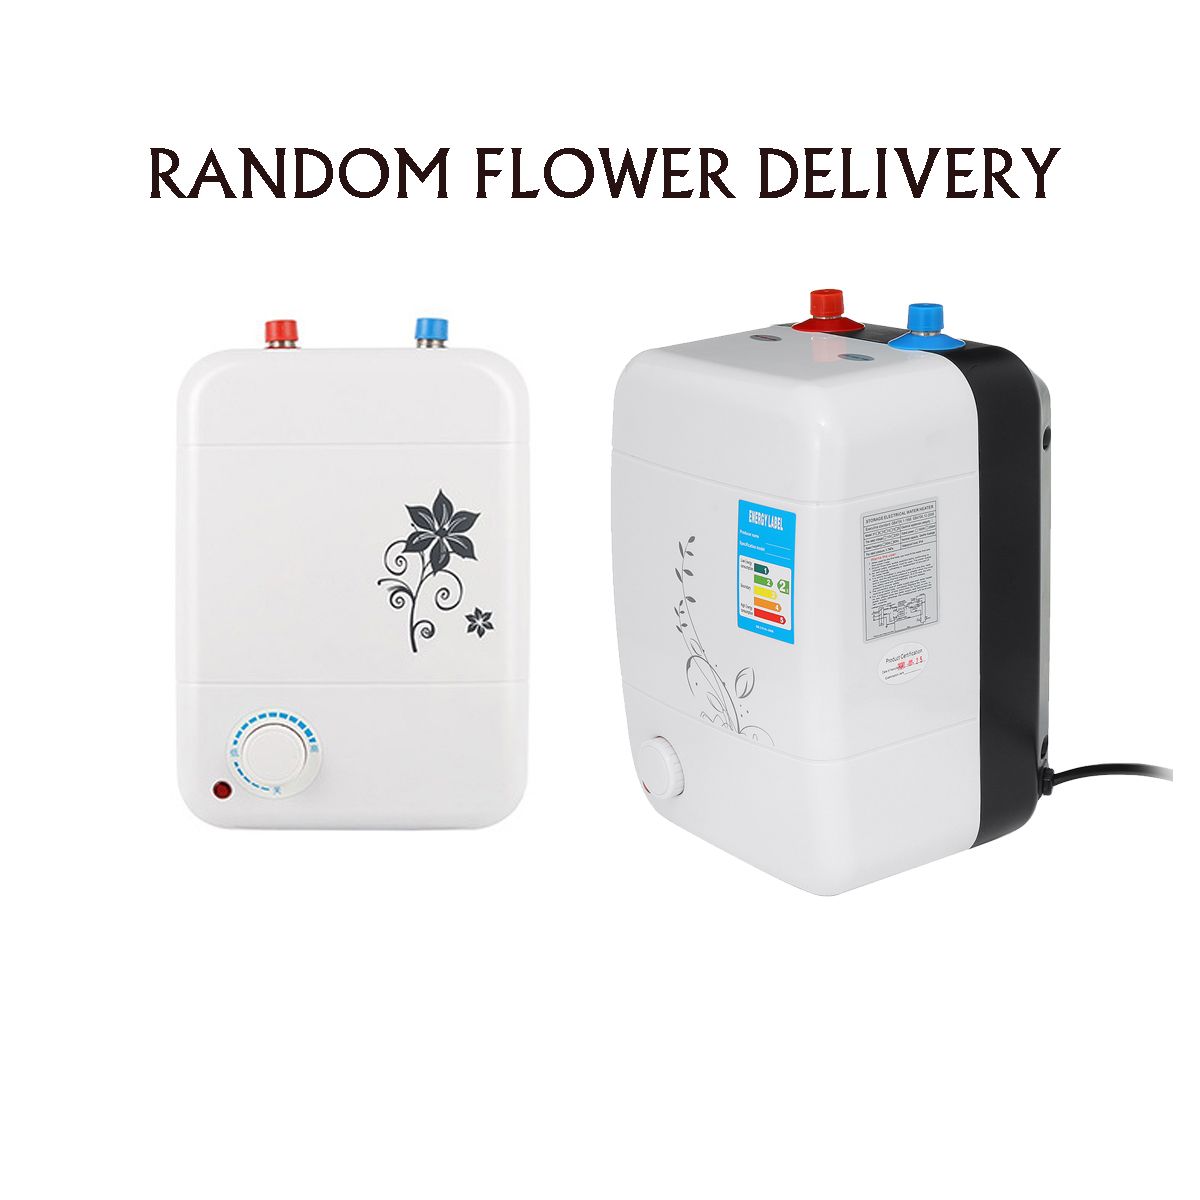 110V220V-1500W-Instant-Electric-Hot-Water-Heater-Shower-Kitchen-Bathroom-Machine-With-Tester-1727669